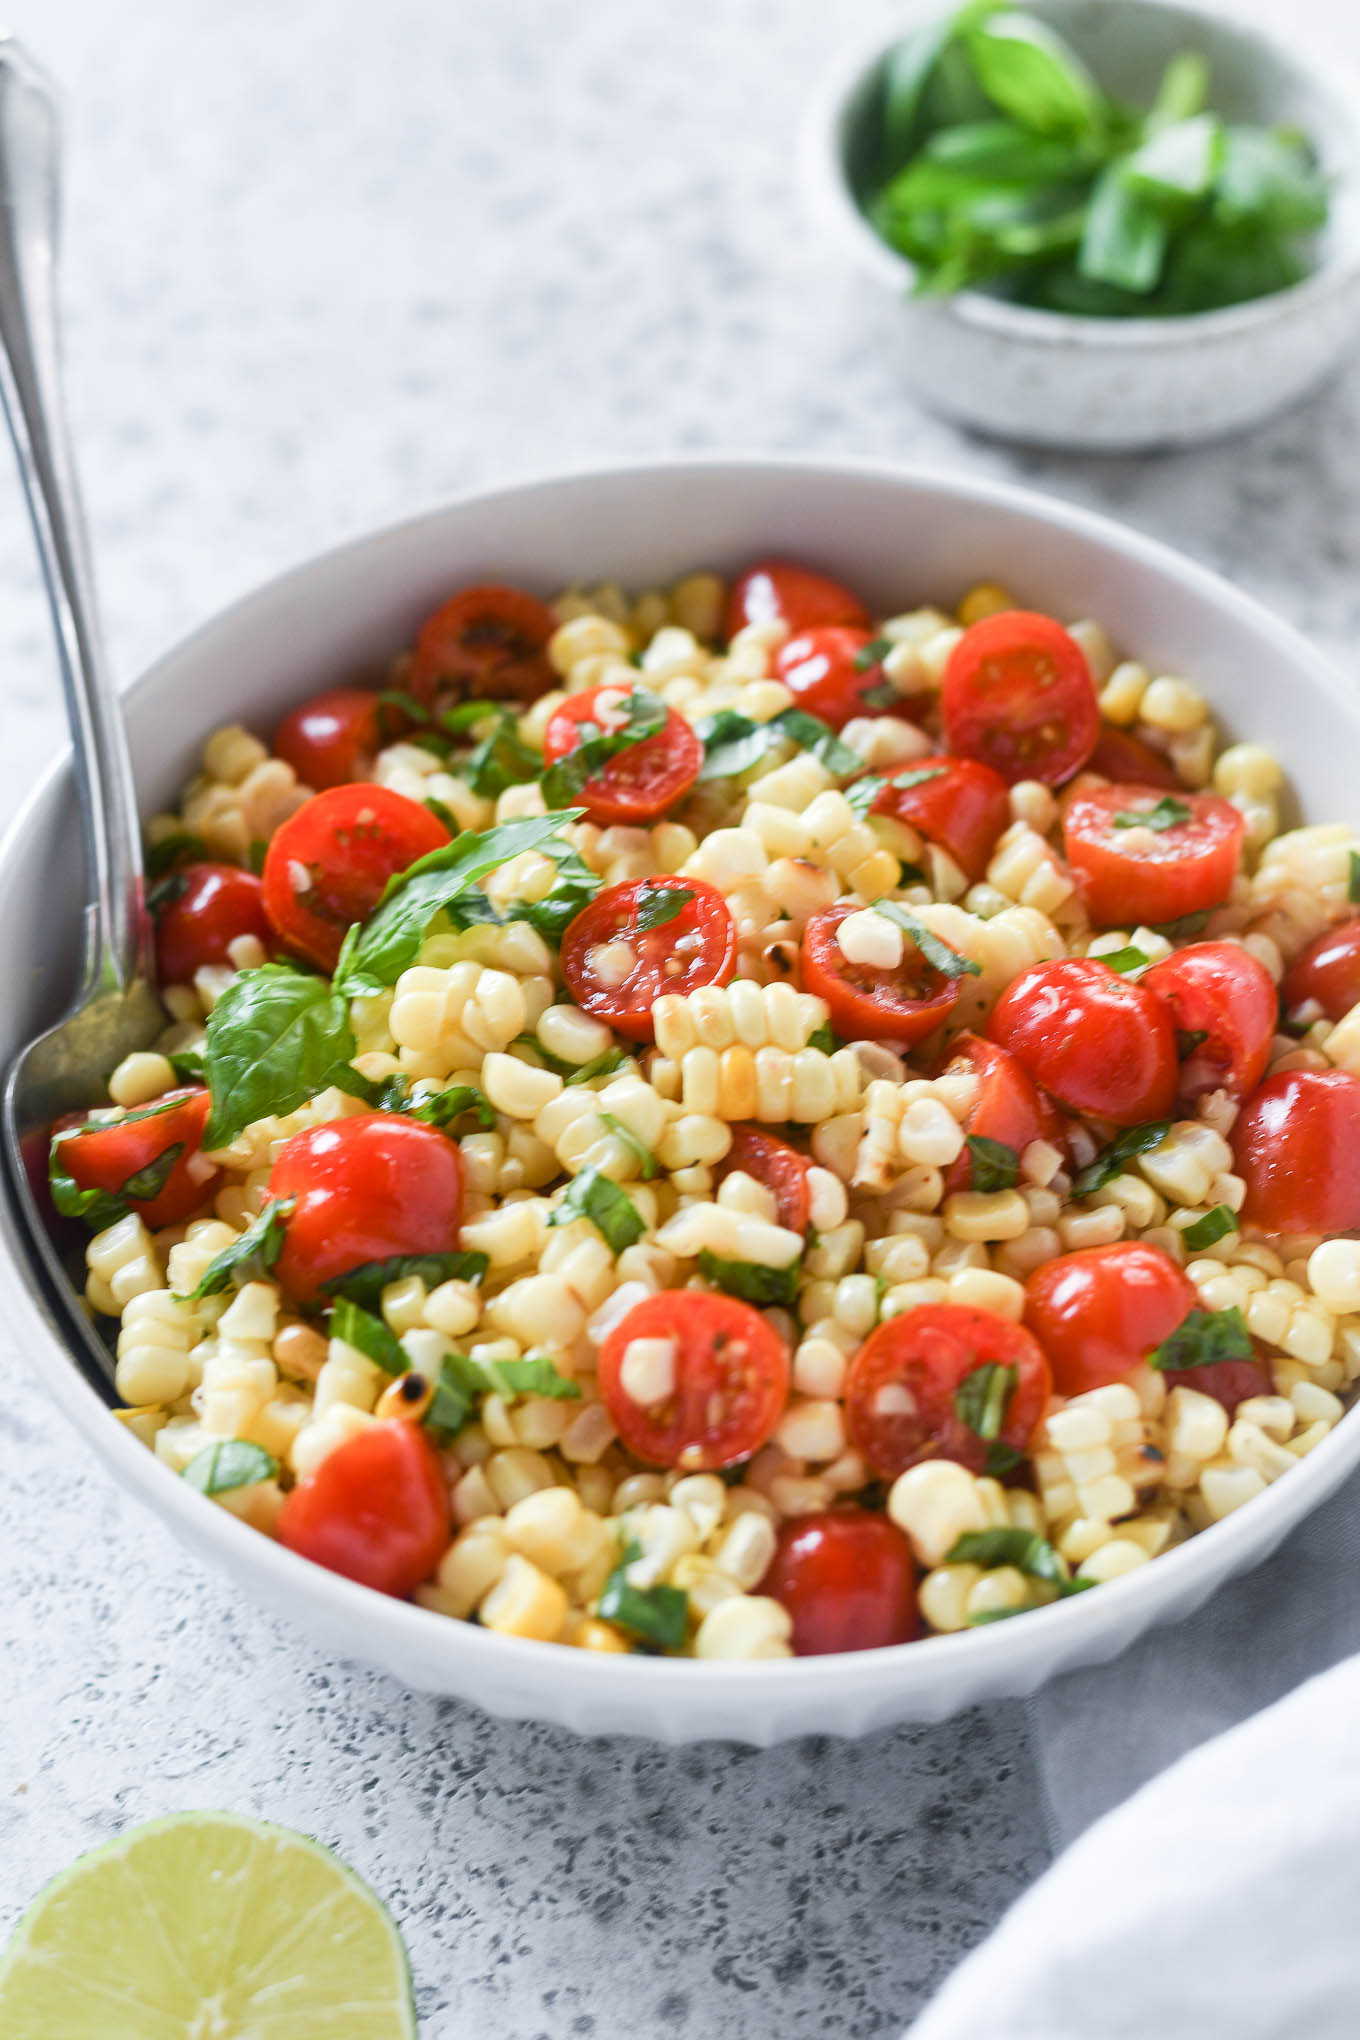 Yellow corn and red tomato salad with chopped green herbs in a white bowl.